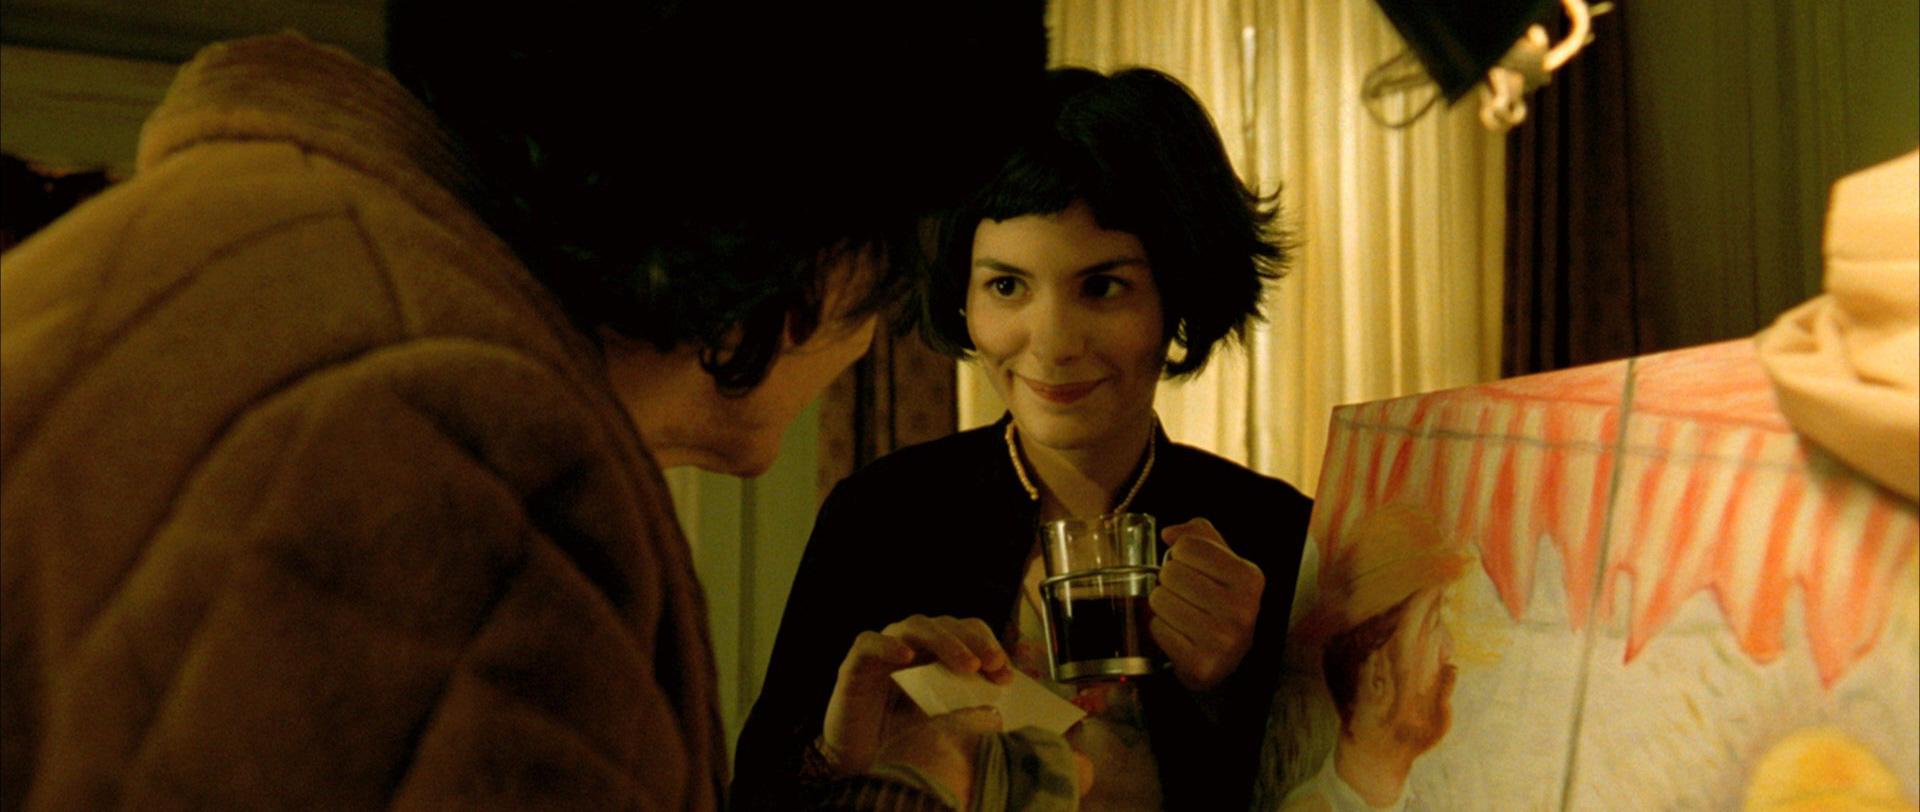 amelie trailer with english subtitles